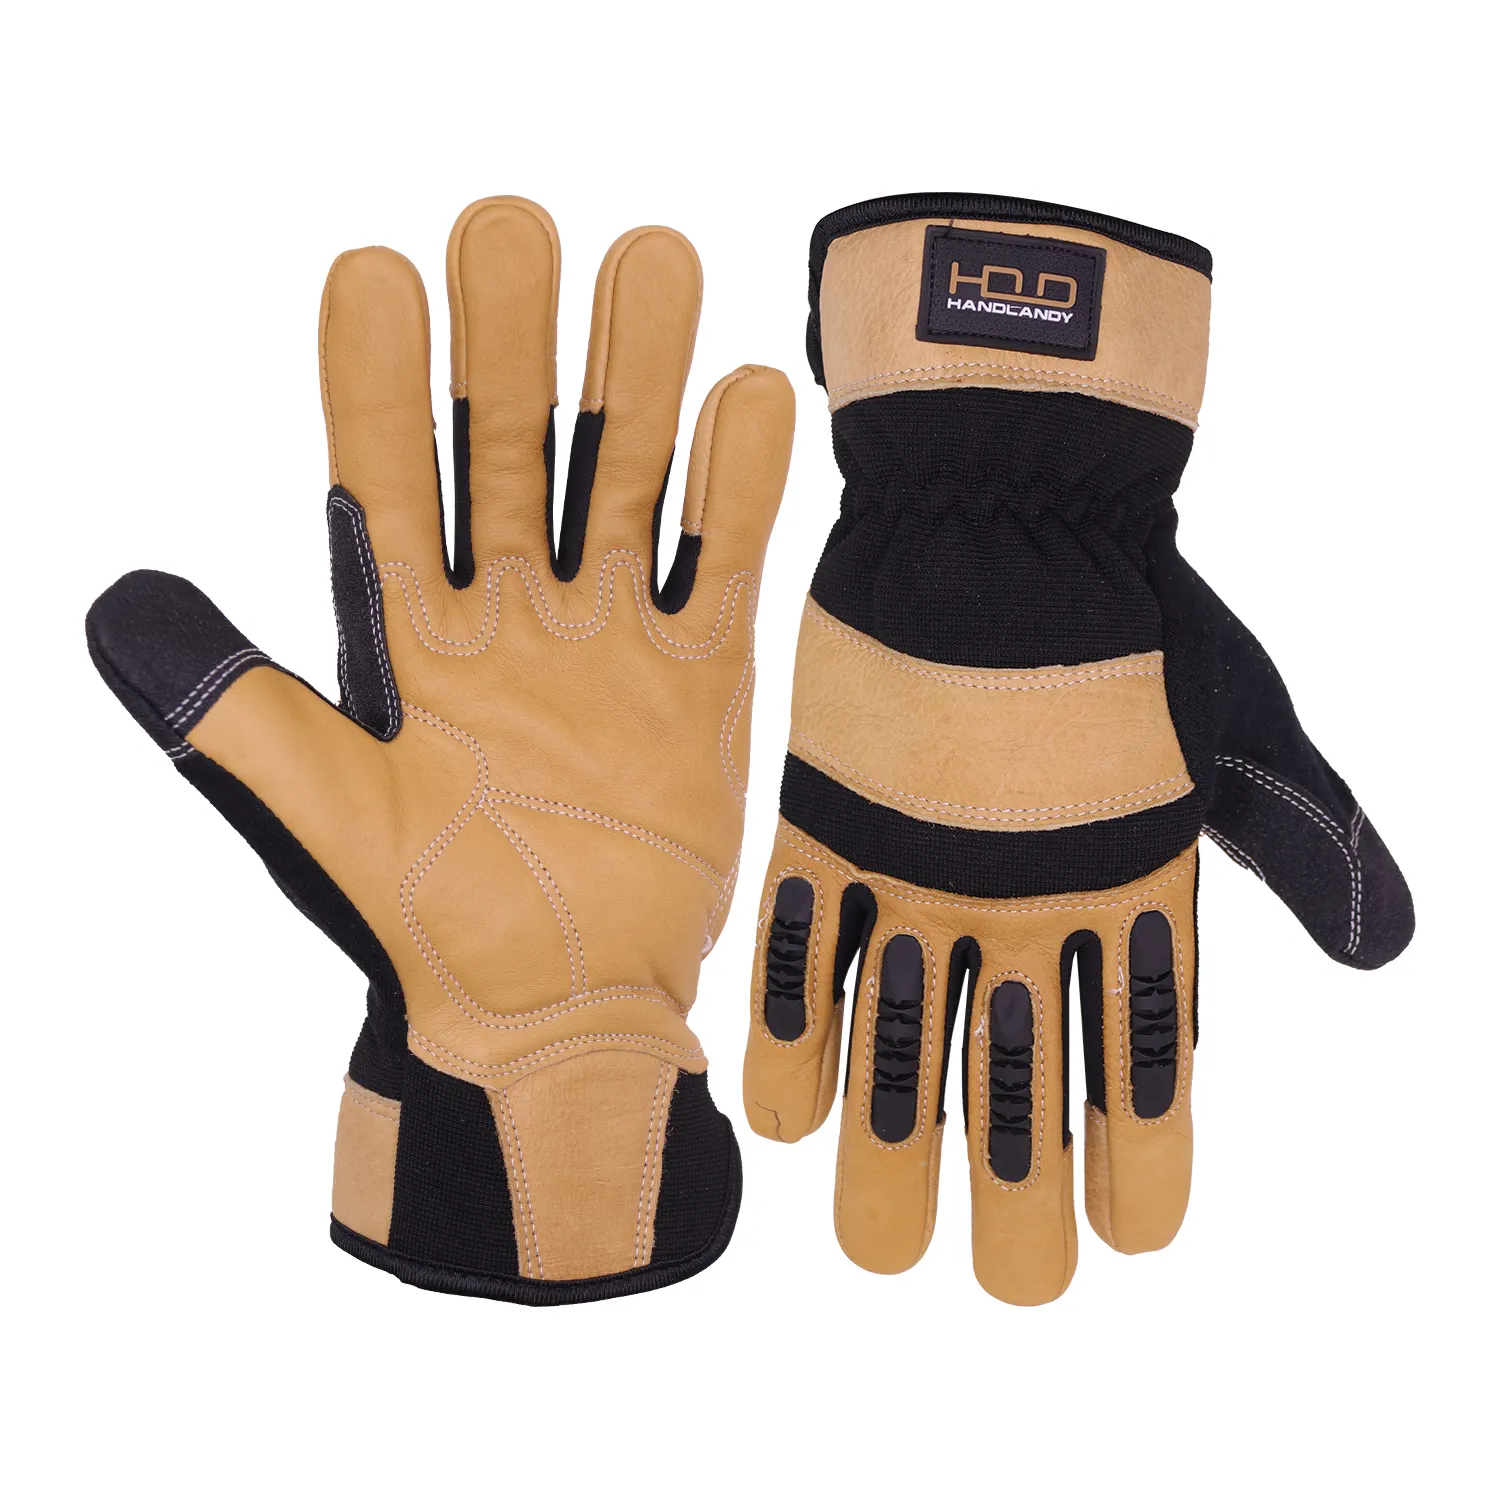 PRISAFETY Comfortable breathable New Products Mechanics Vibration-Resistant full grain cowhide leather gloves for women for men